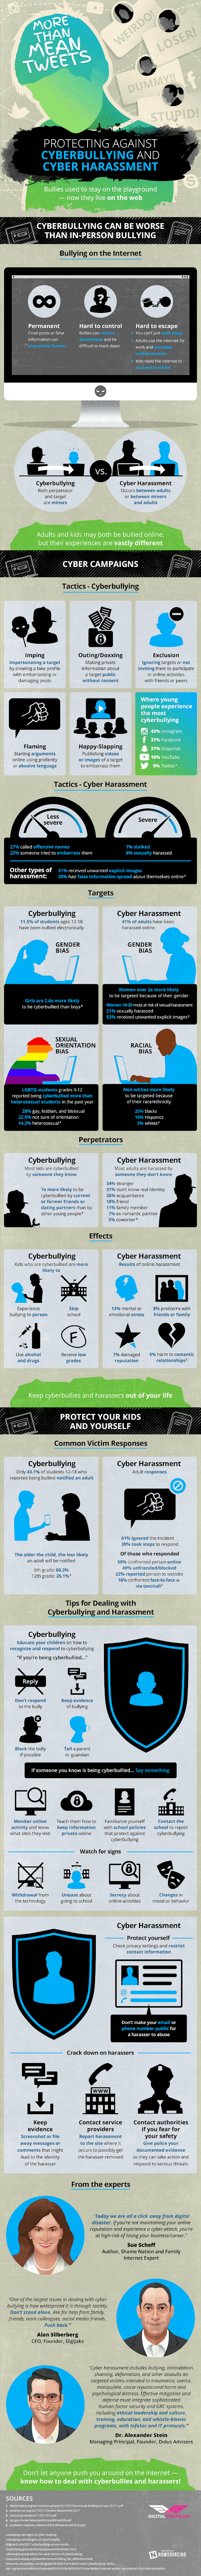 More Than Mean Tweets: Protecting Against Cyberbullying and Cyber Harassment #infographic #Cyberbullying #Cyber Harassment #Tweets